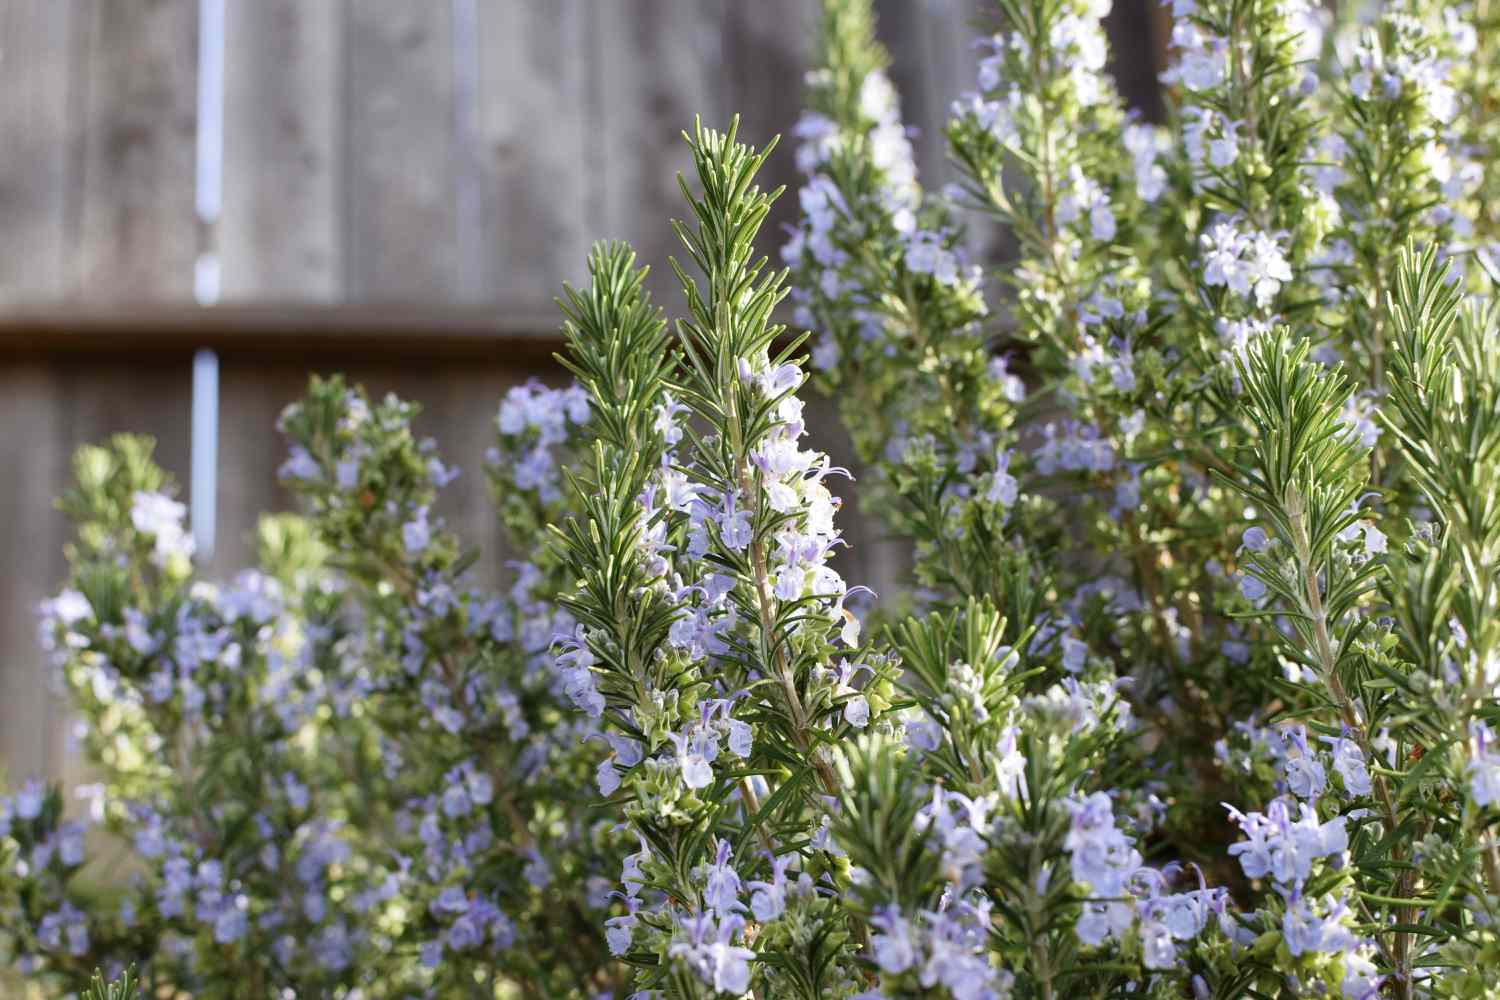 Rosemary herb shrubs with thin needle-like leaves and small light blue flowers